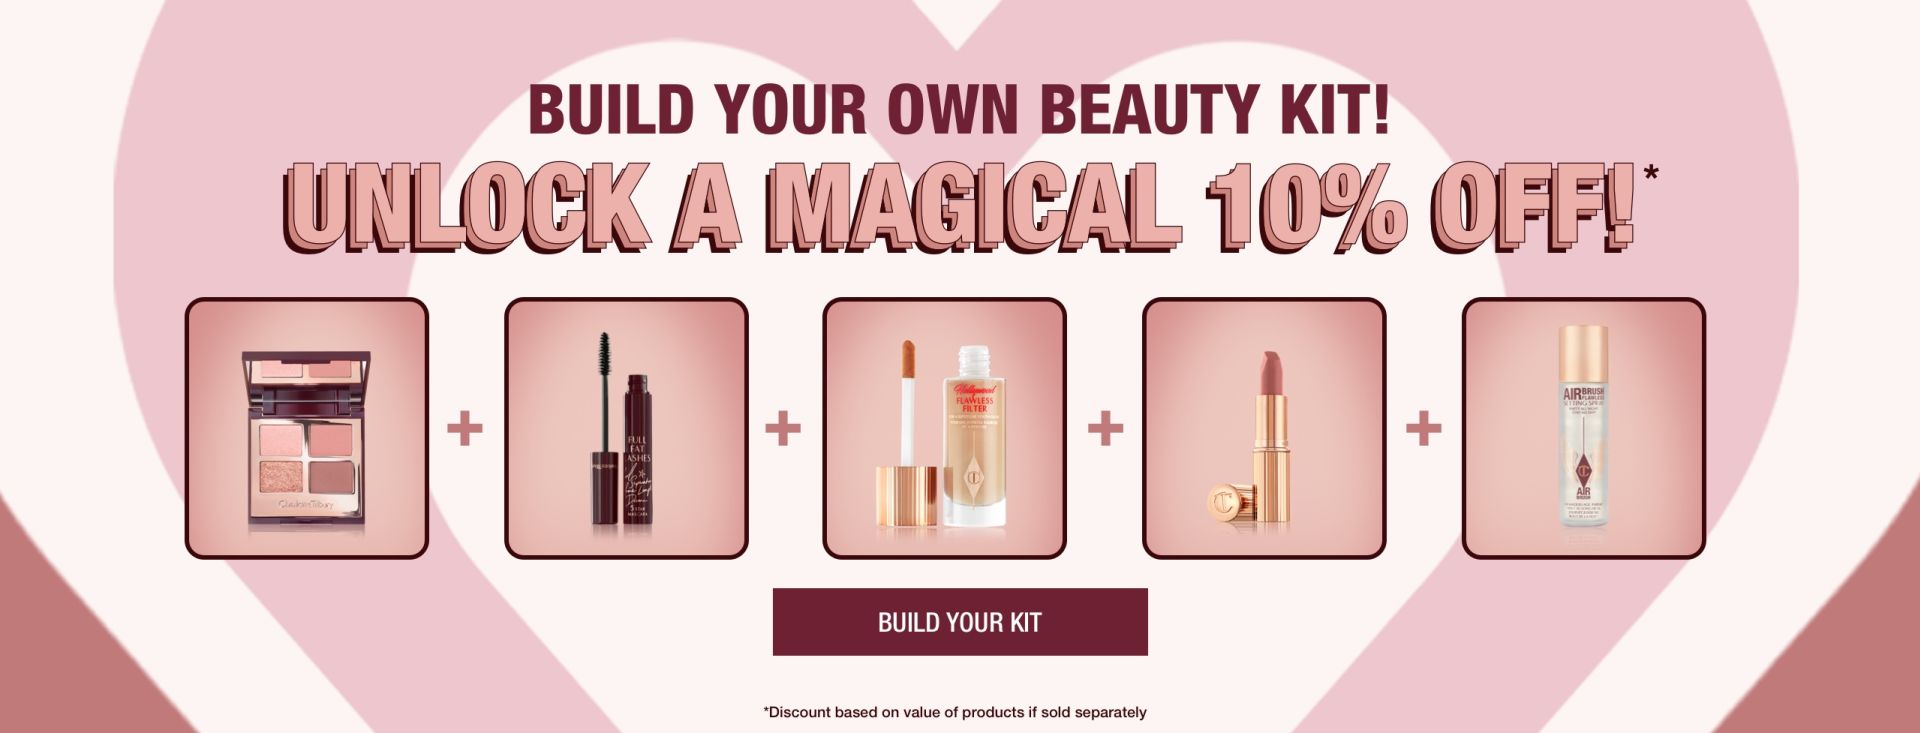 Get 10% off when you create your own beauty kit. Build your kit now. 